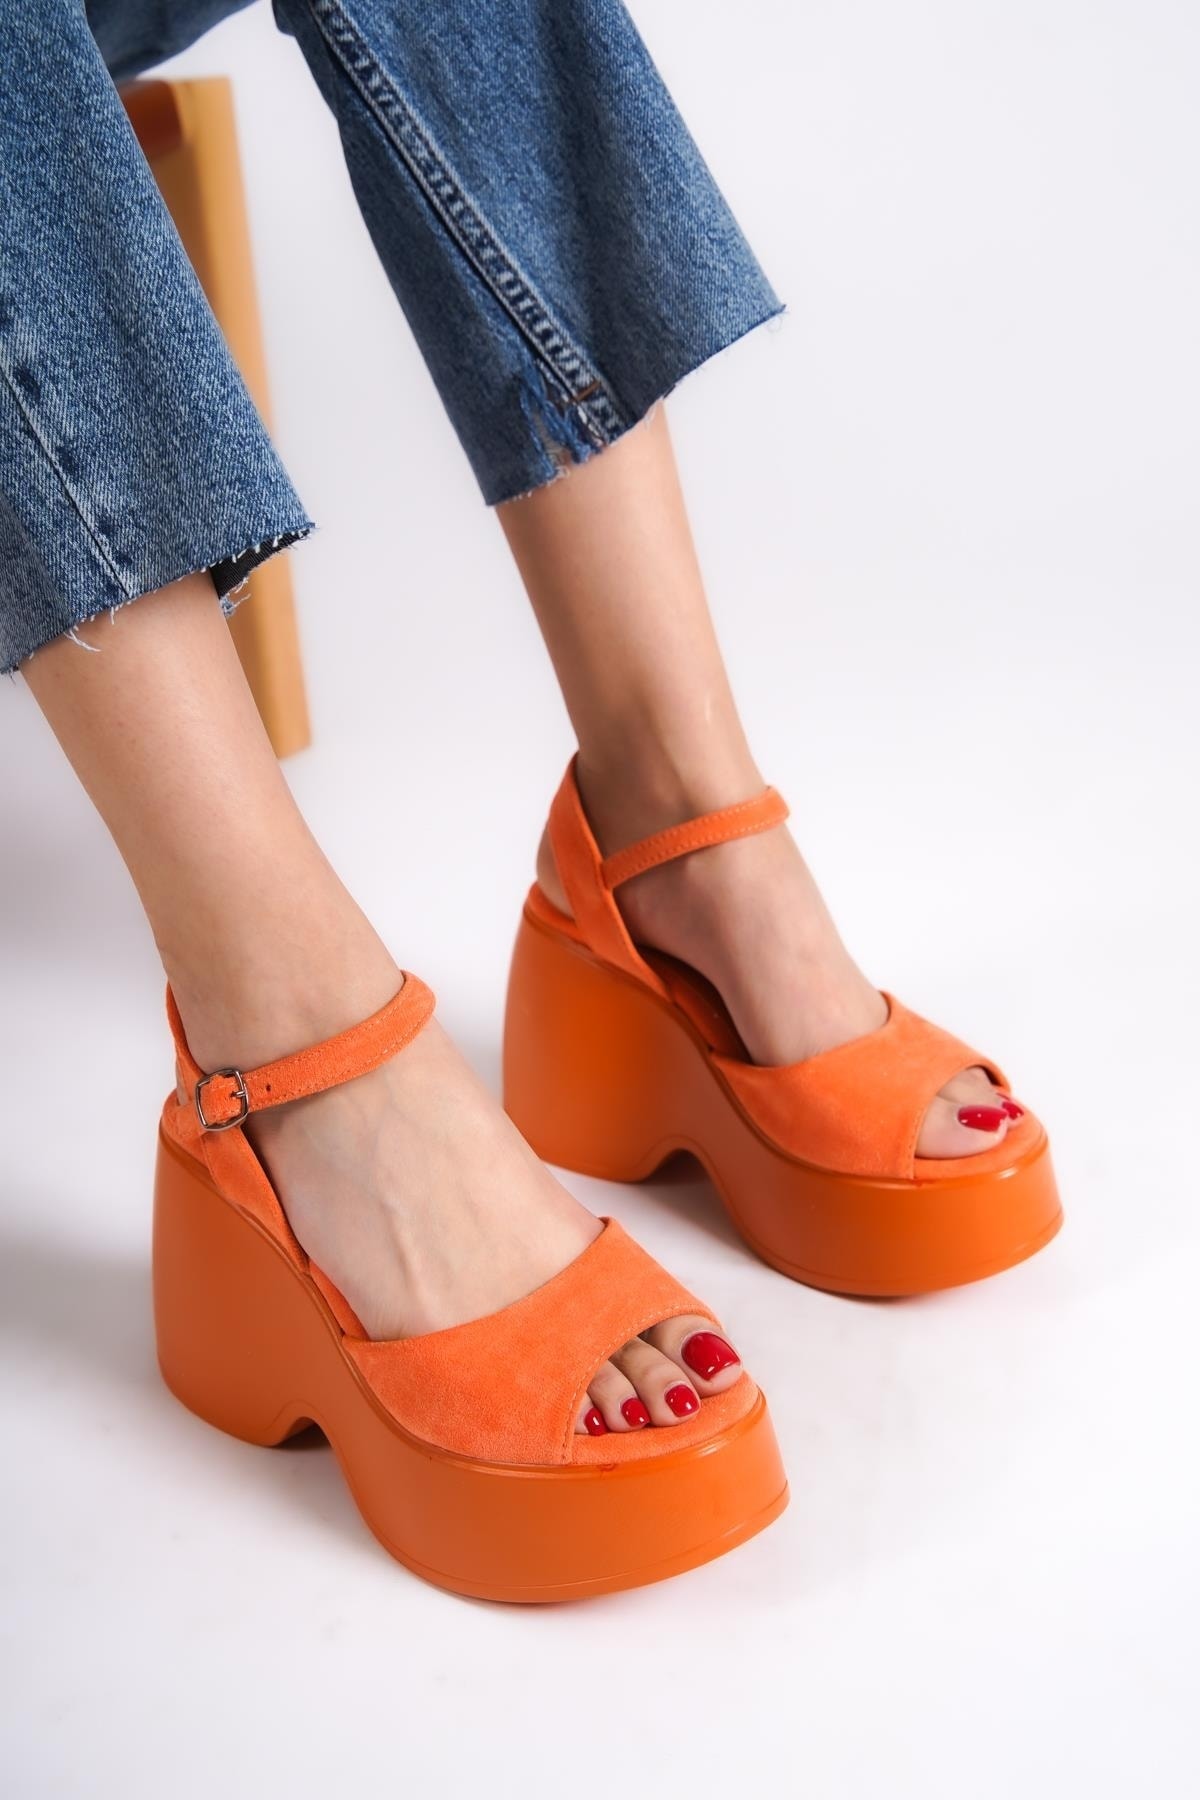 Levně Capone Outfitters Capone Women's High Wedge Heel Ankle Strap Orange Orange Sandals